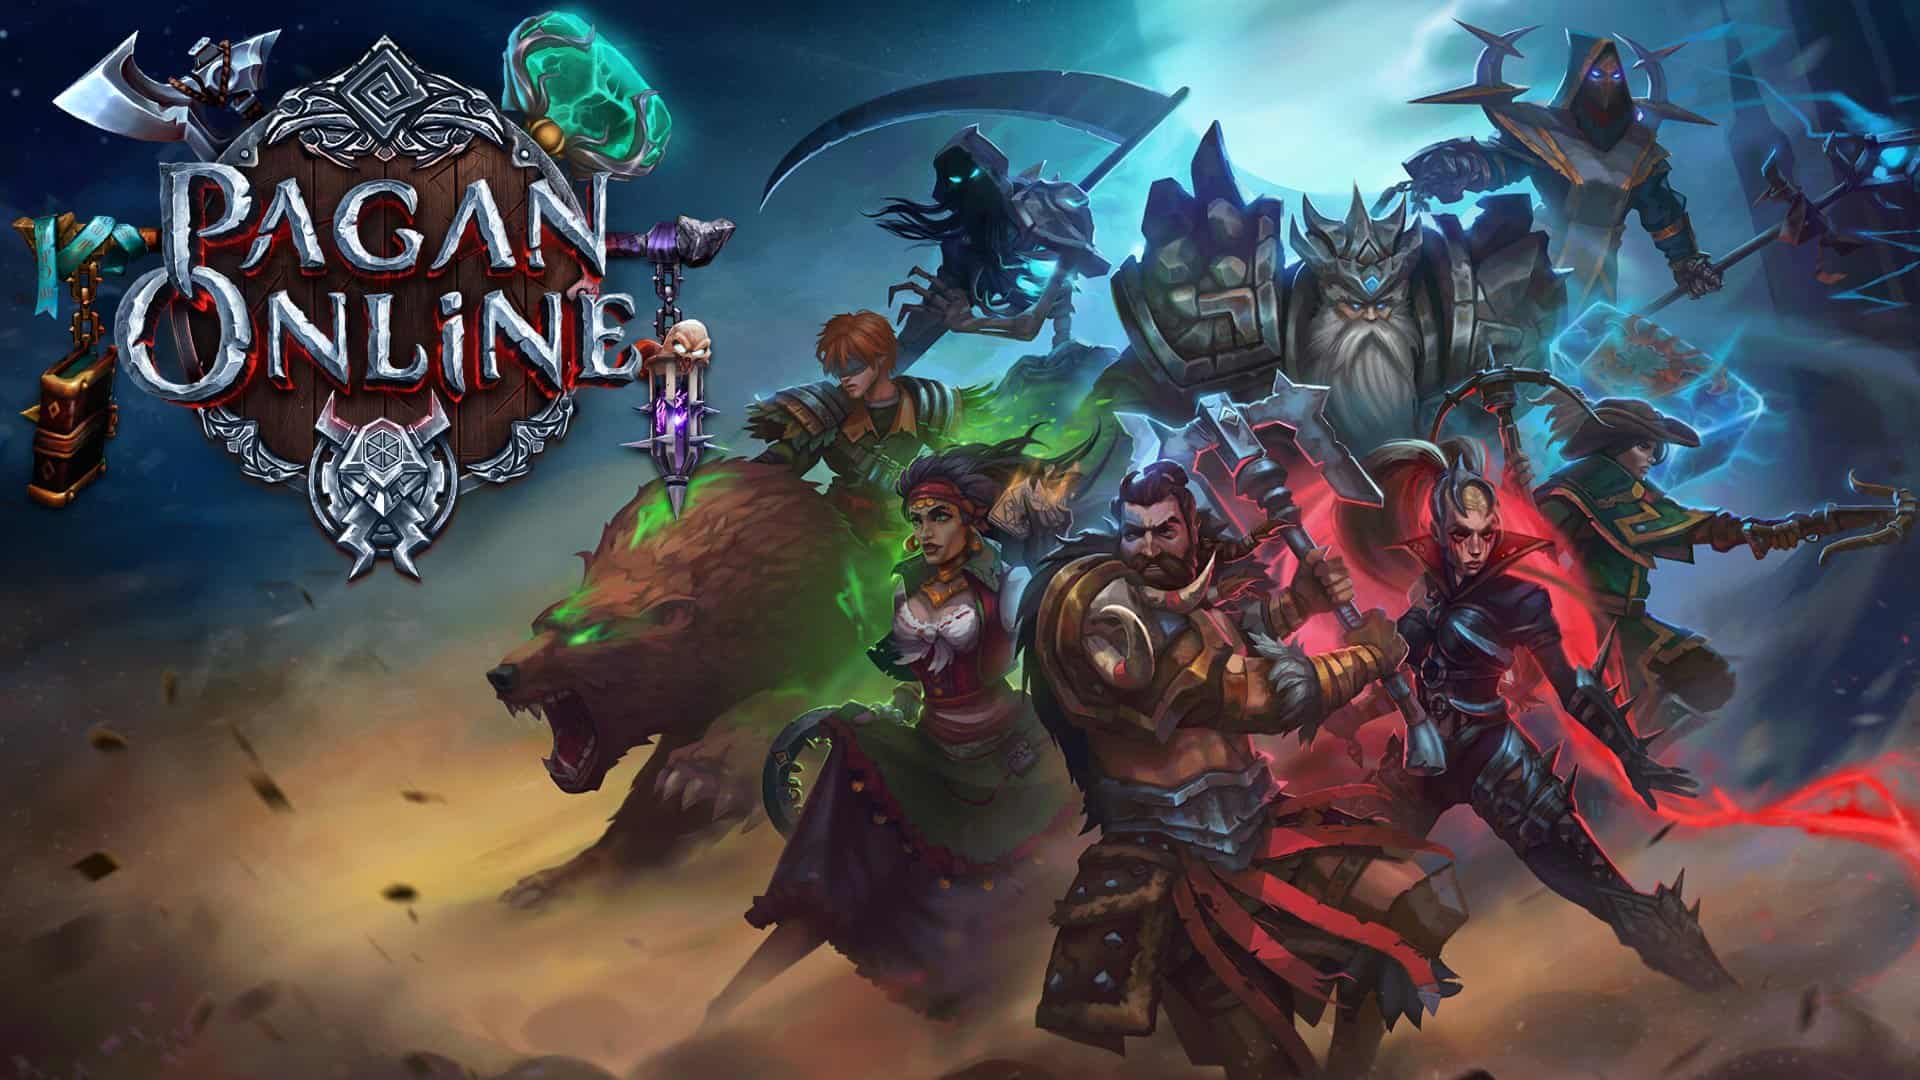 Quest for Glory And Claim The Treasures Of The Gods in Pagan Online – Available Now